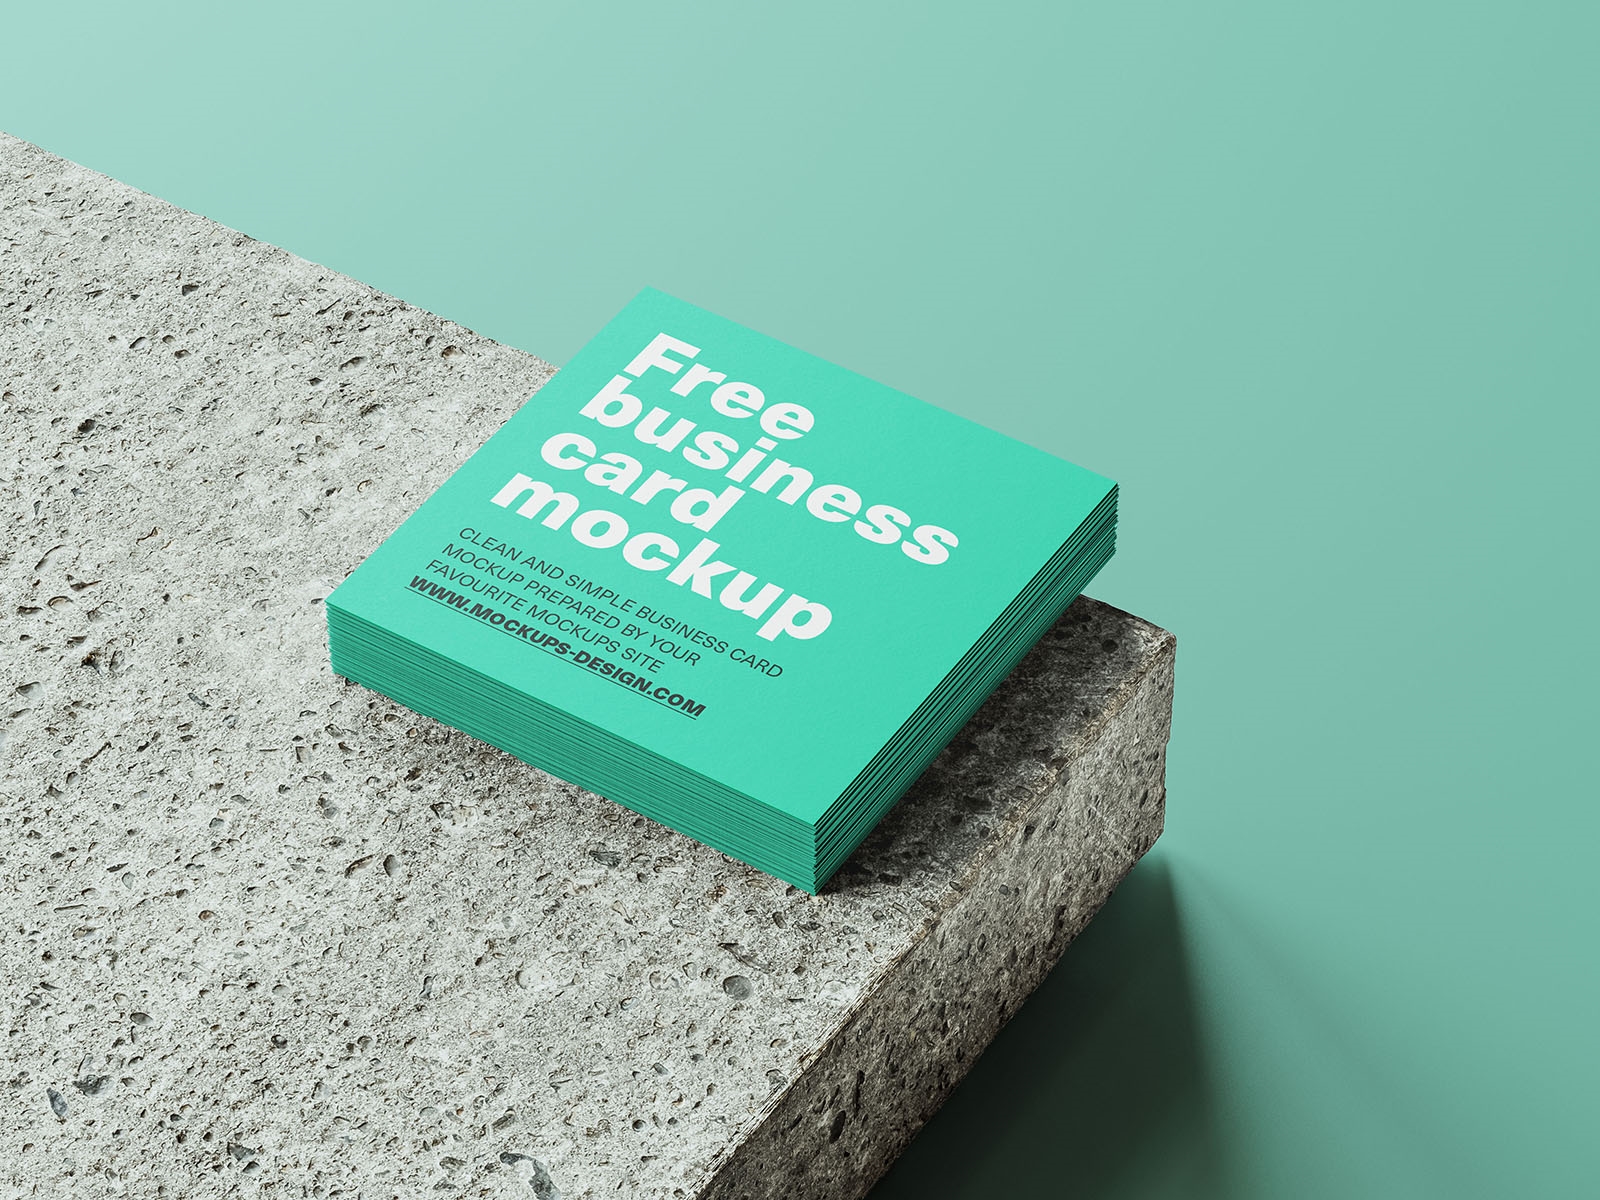 4 Mockups of Square Business Cards Mockup from Different Angles FREE PSD